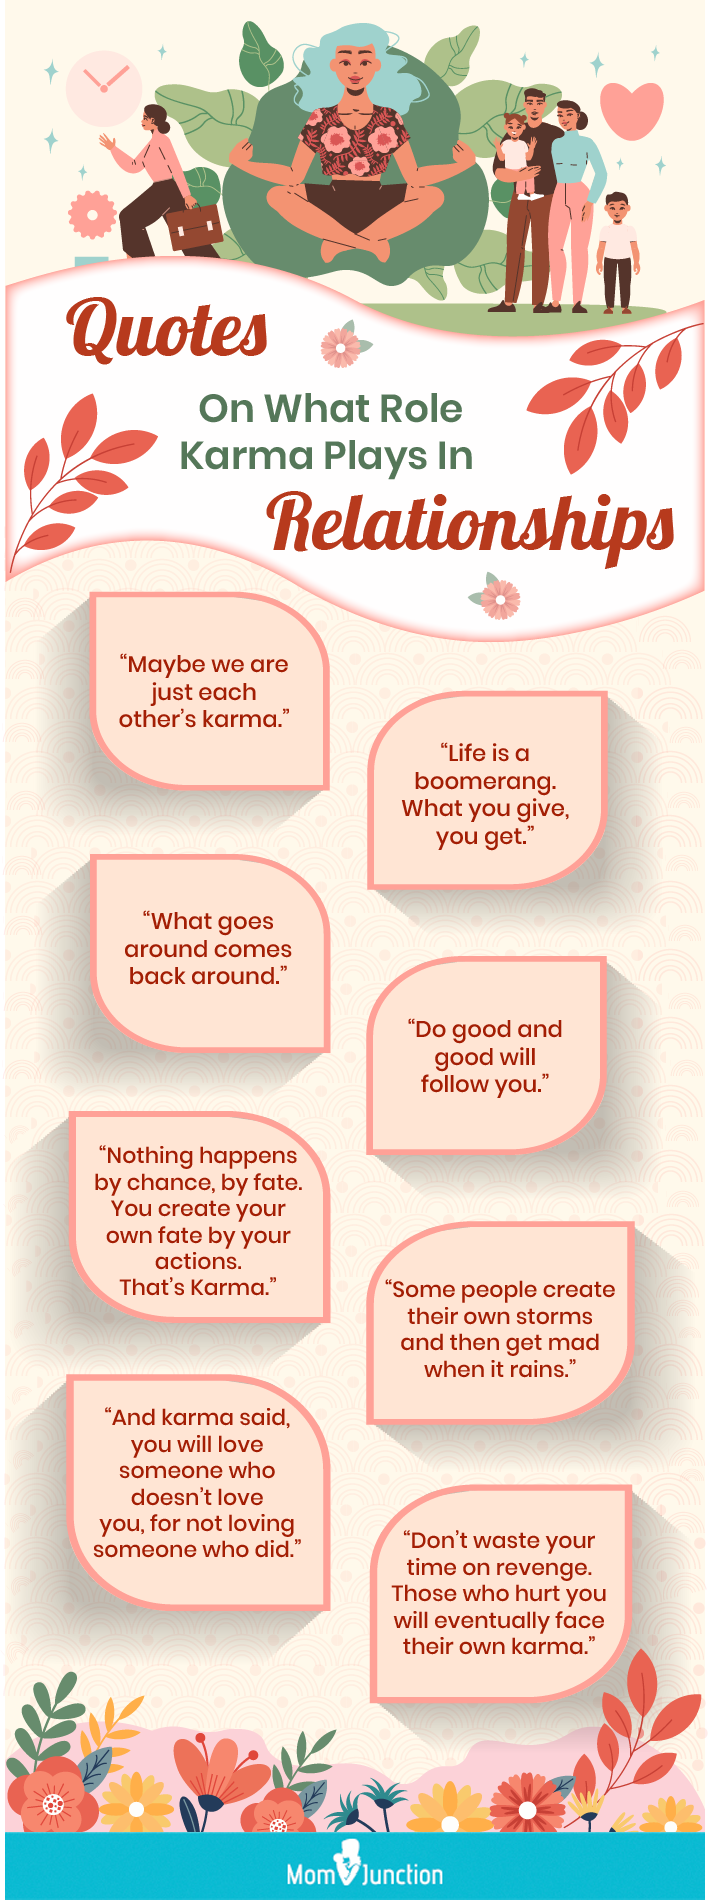 quotes on what role karma plays in relationships (infographic)